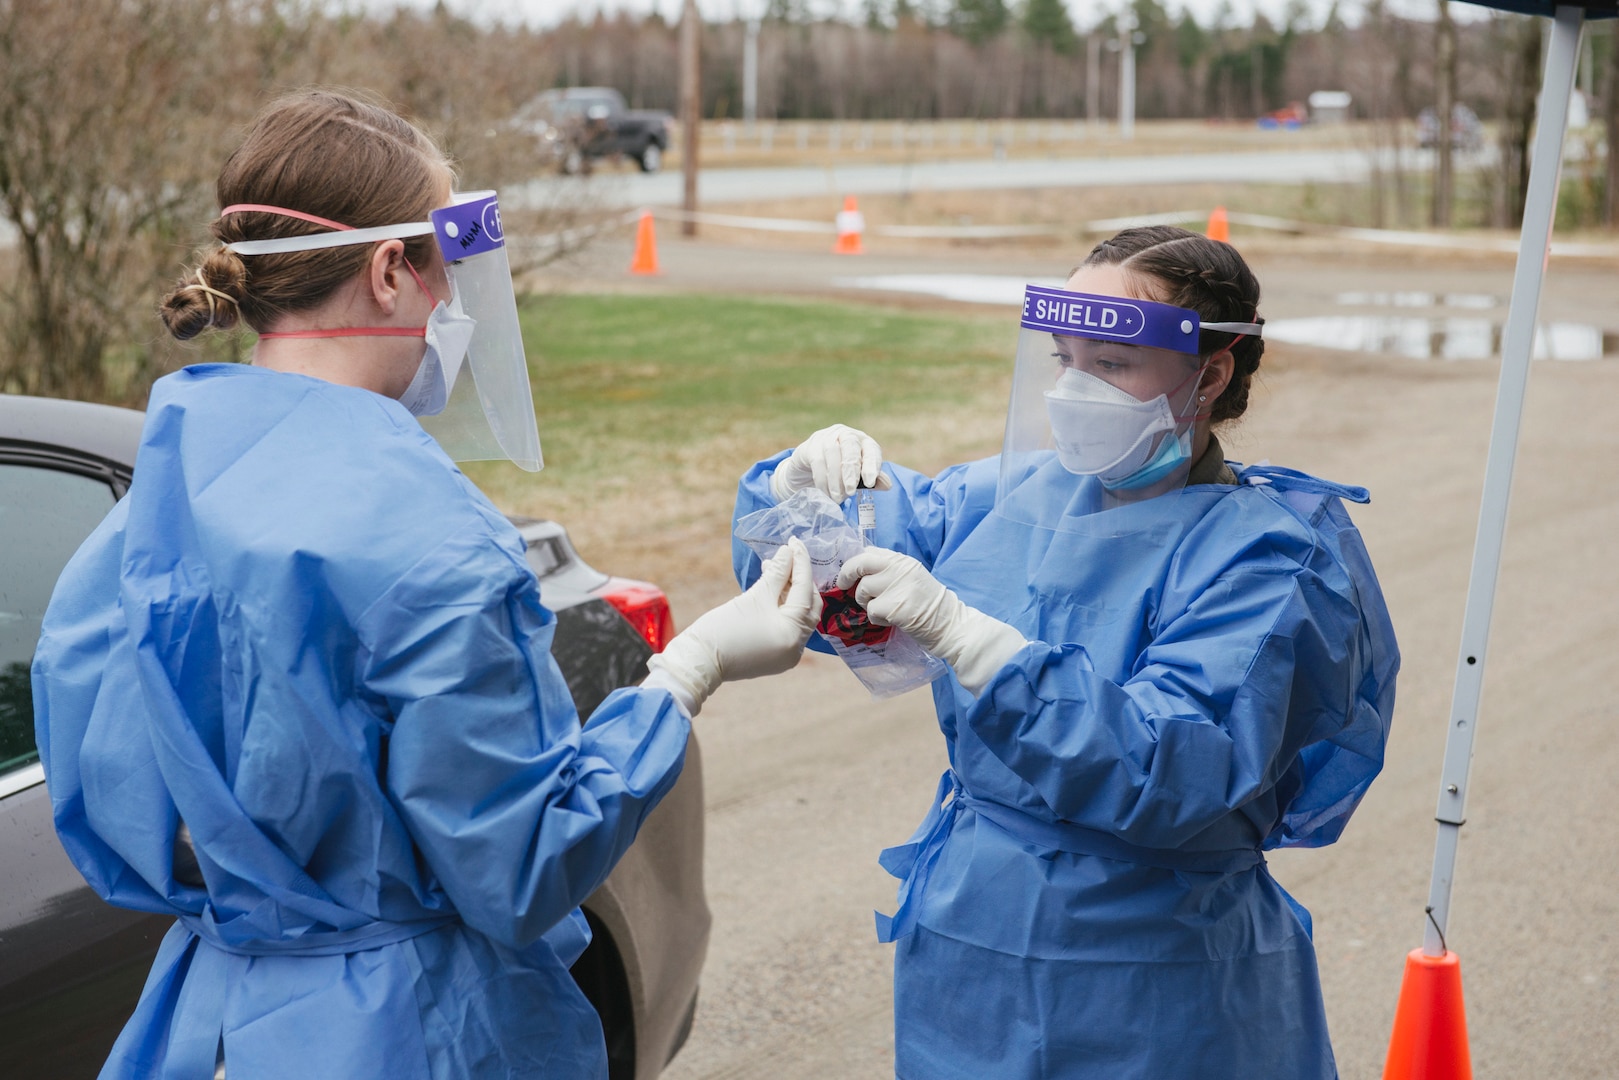 From left, Staff Sgt. Megan McMahon and Airman 1st Class Alyssa Berger of the 157th Medical Group collect a nasal sample May 1, 2020, at the Lancaster armory.